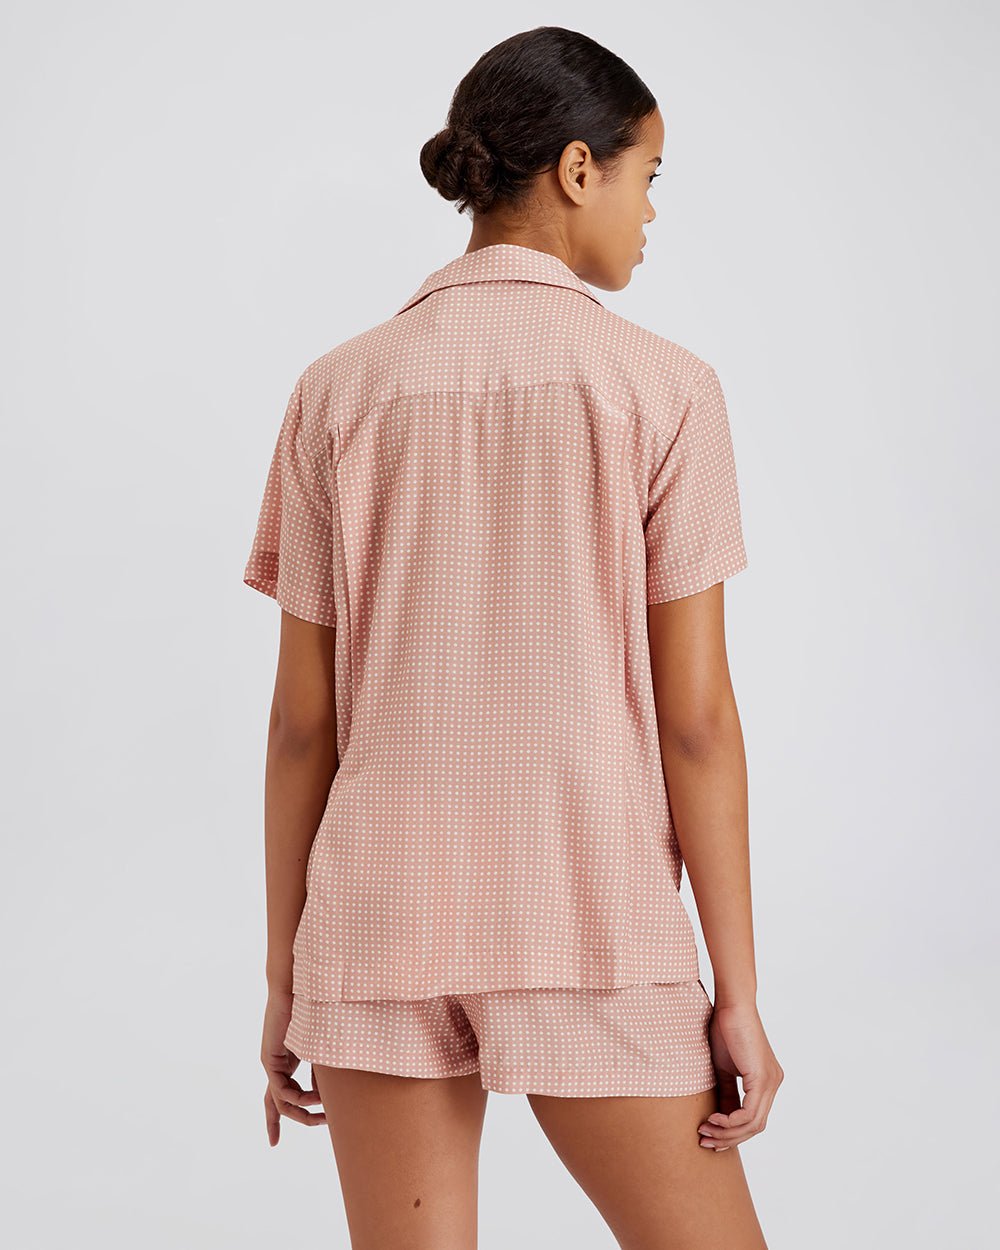 The Dahlia Top - Solid & Striped